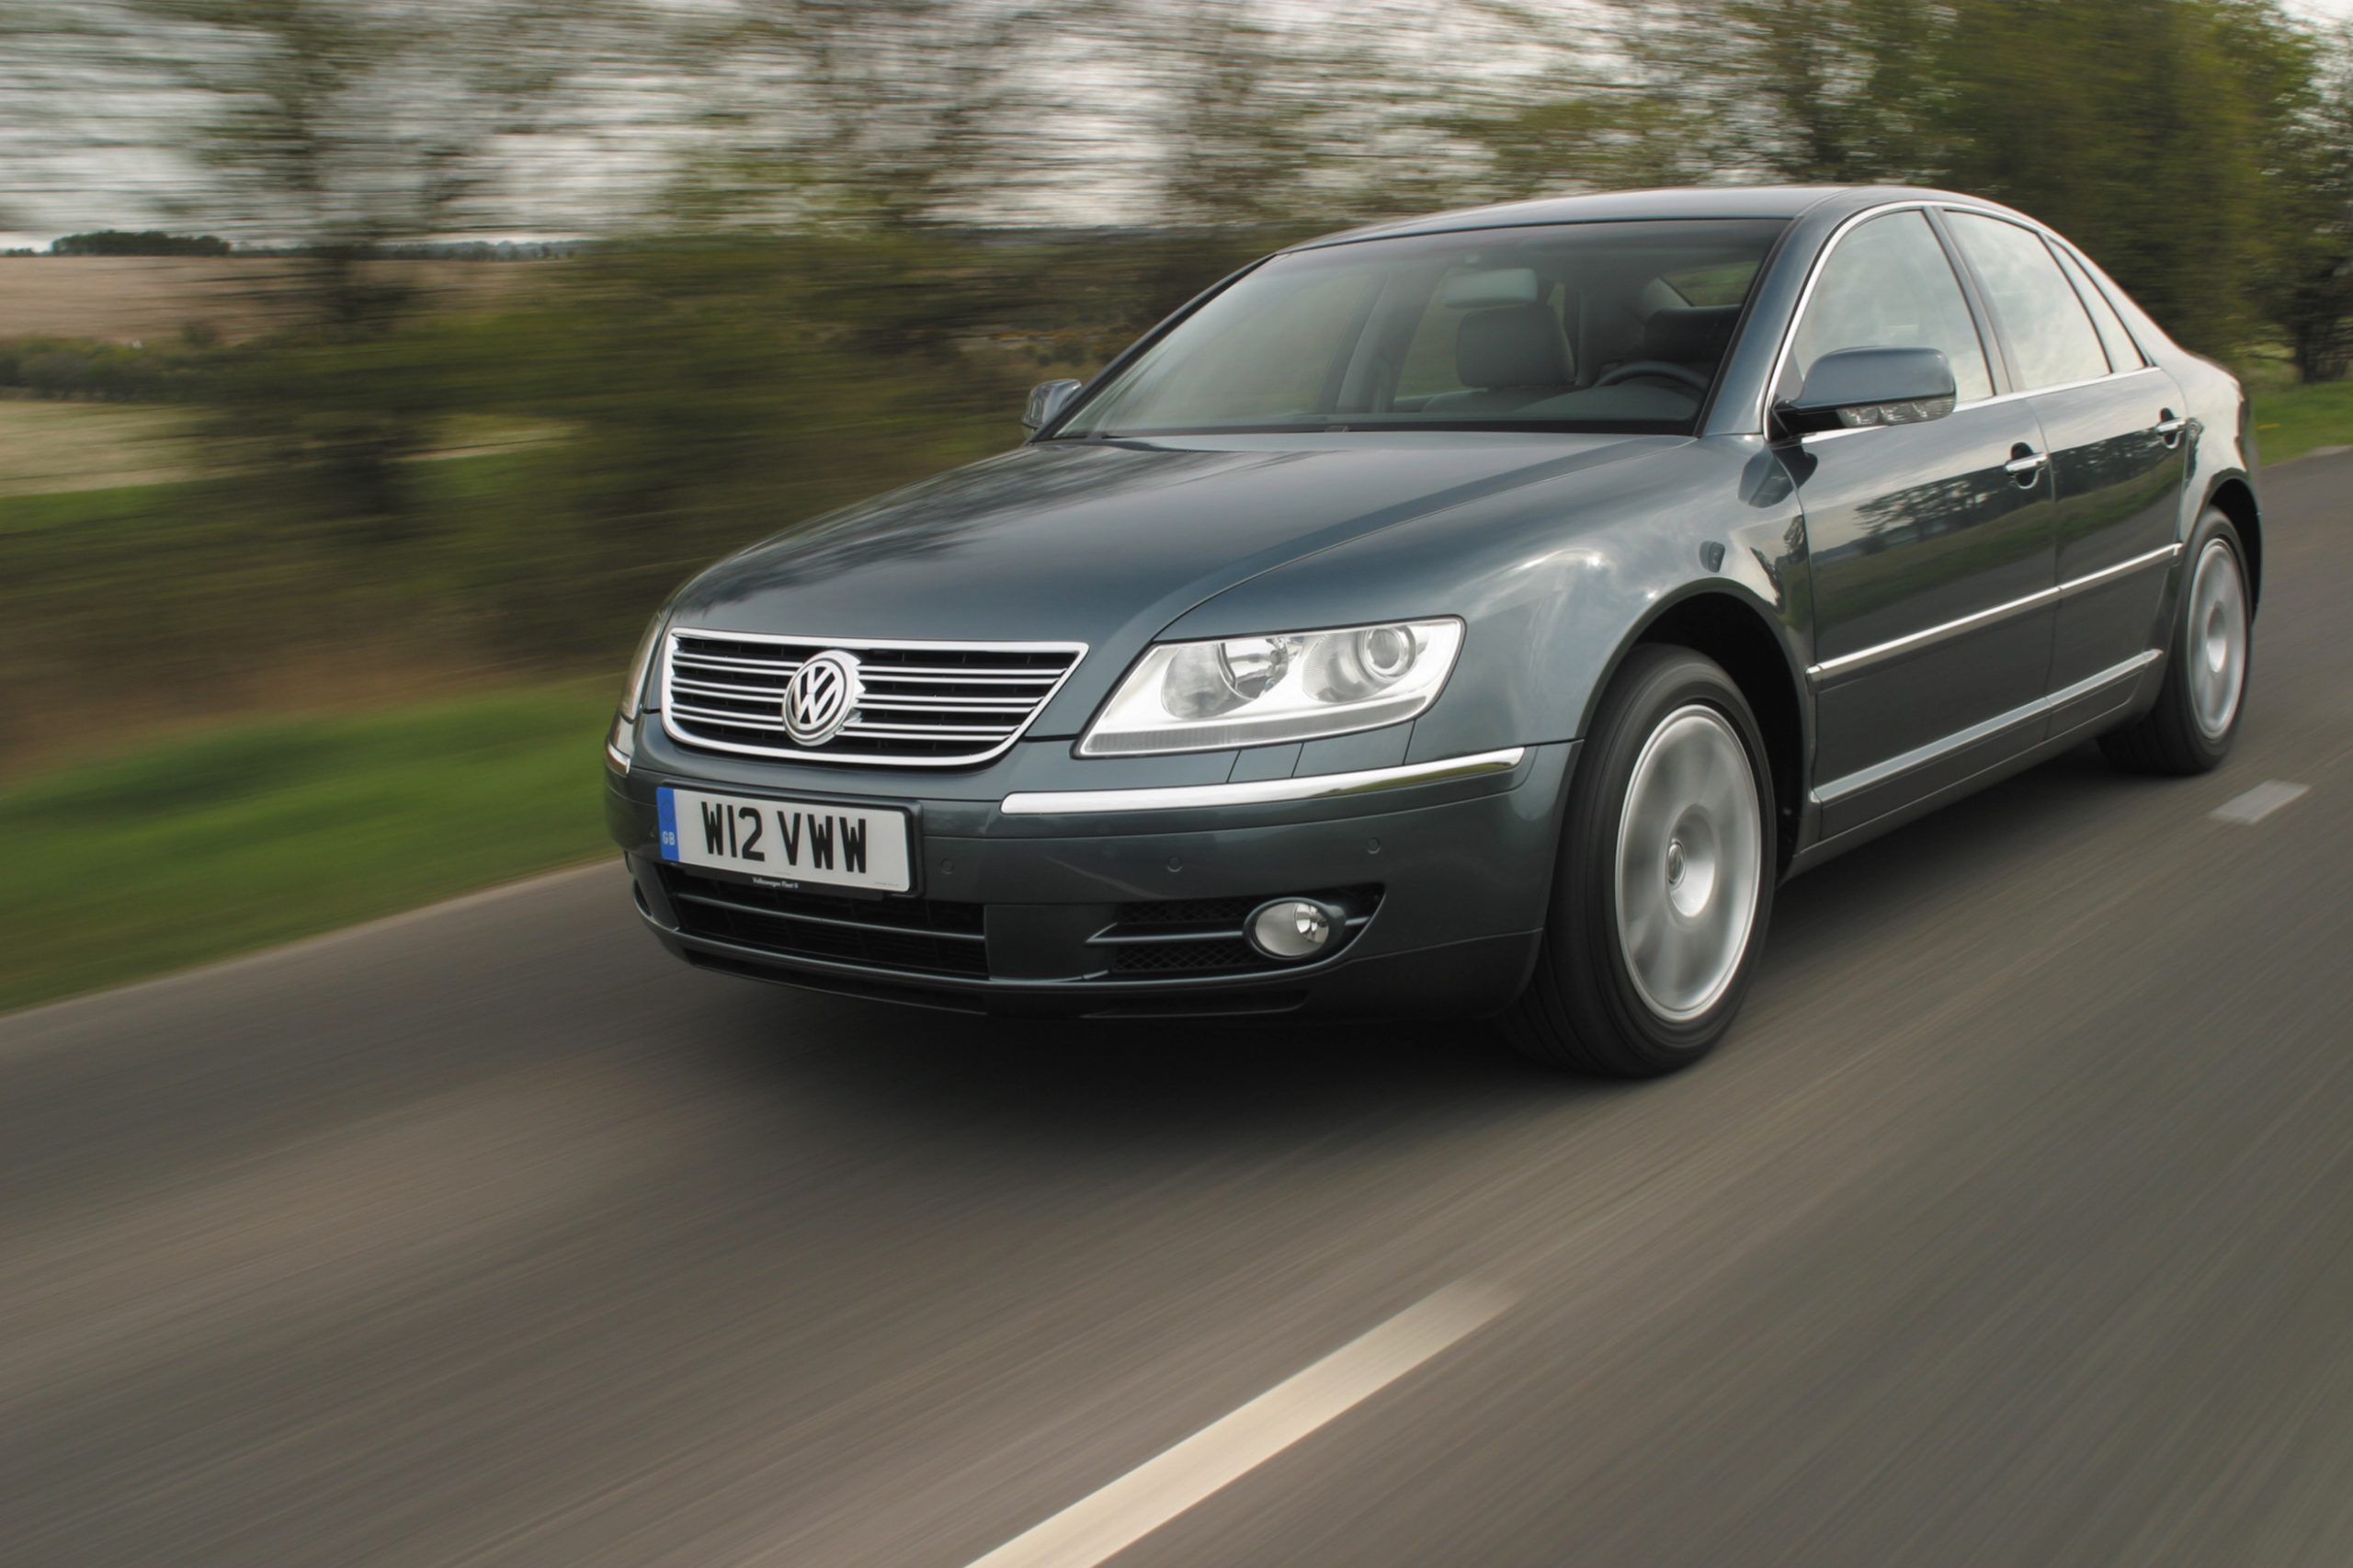 Volkswagen's Phaeton got everything wrong – and that's why we like it